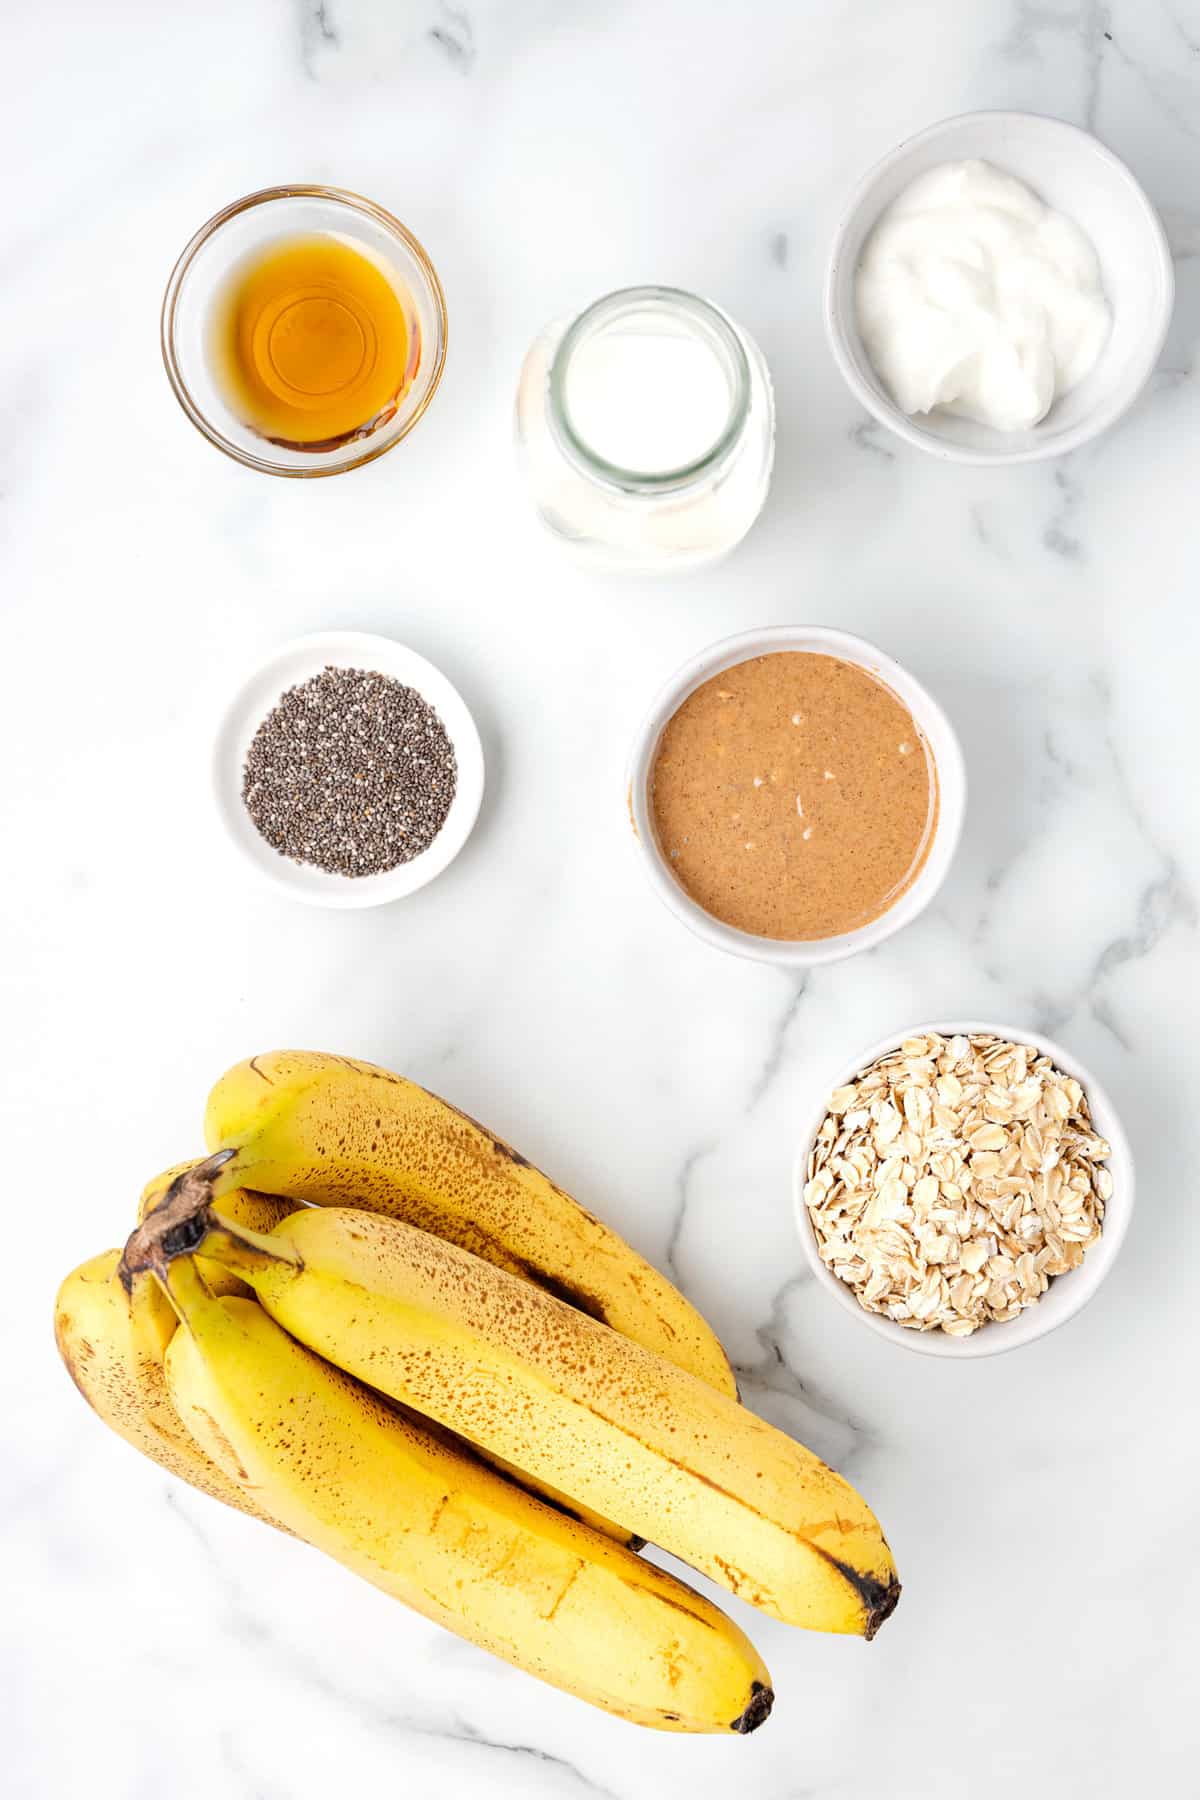 Ingredients needed for recipe, including bananas.